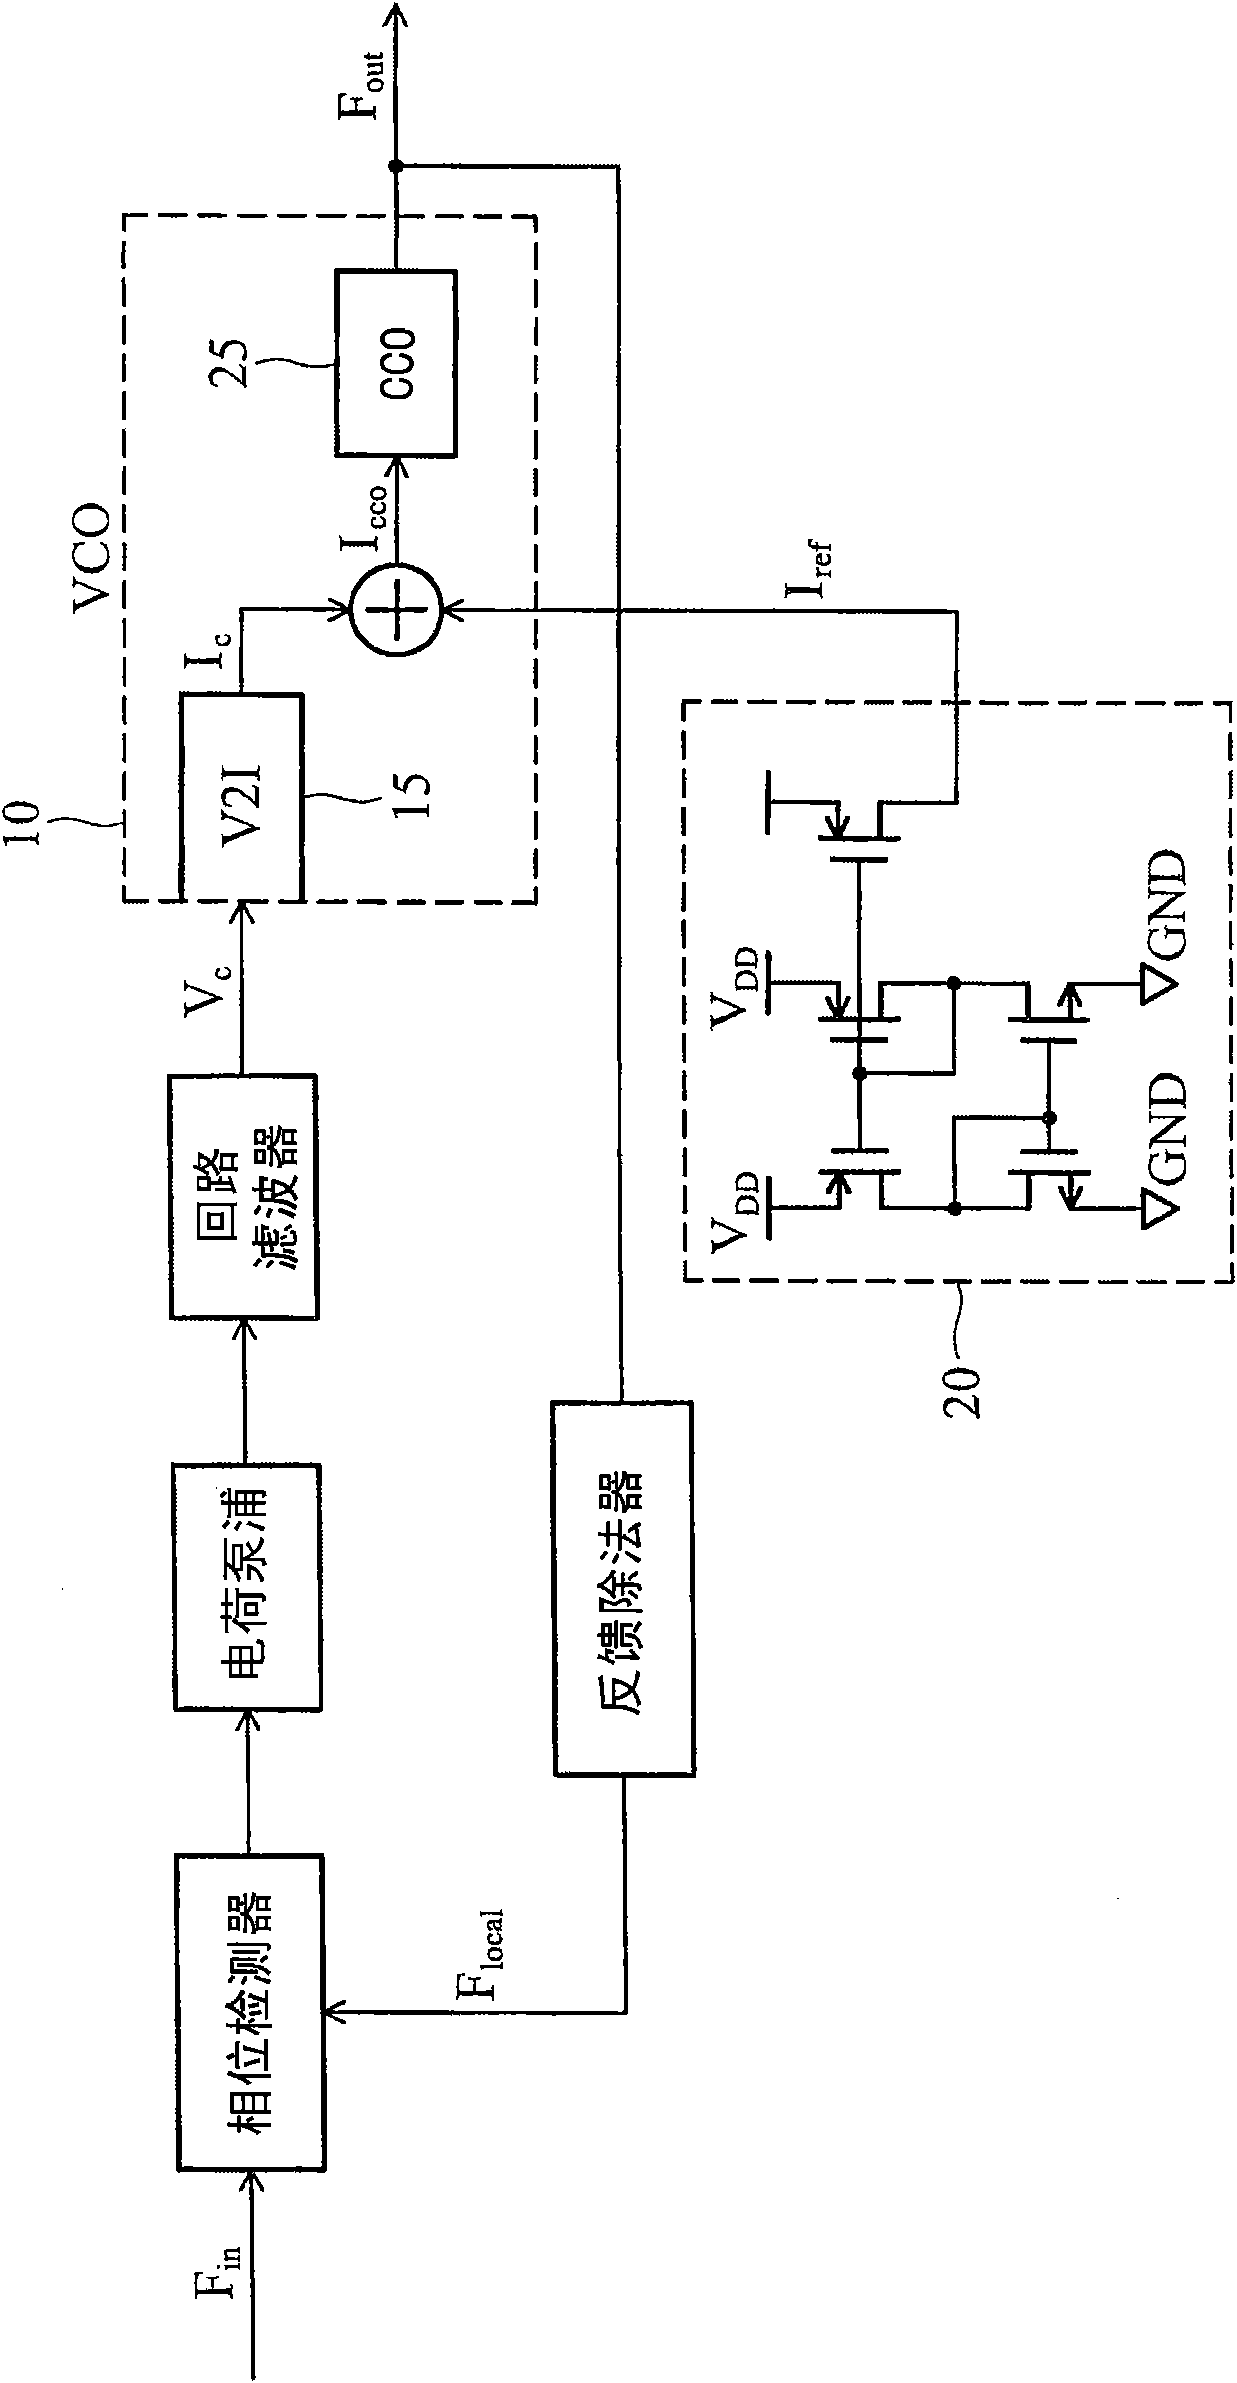 Phase lock loop (pll) with gain control